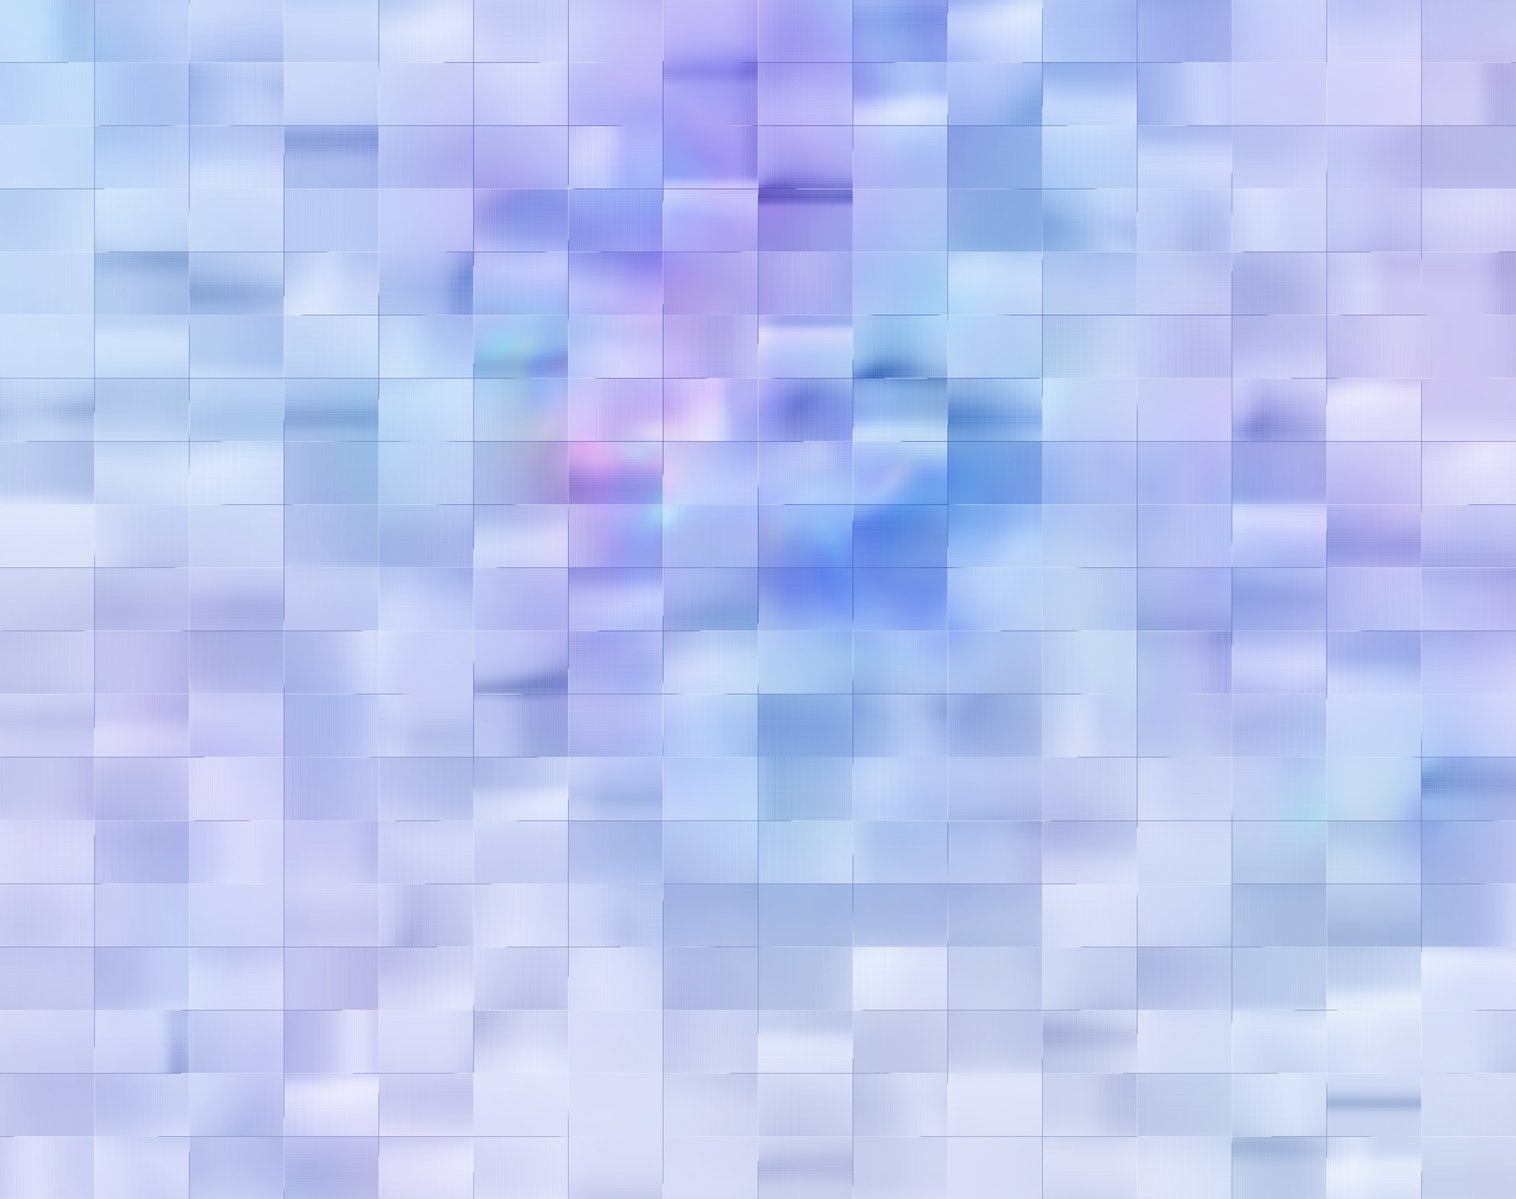 blurry texture of white blue and light purple squares